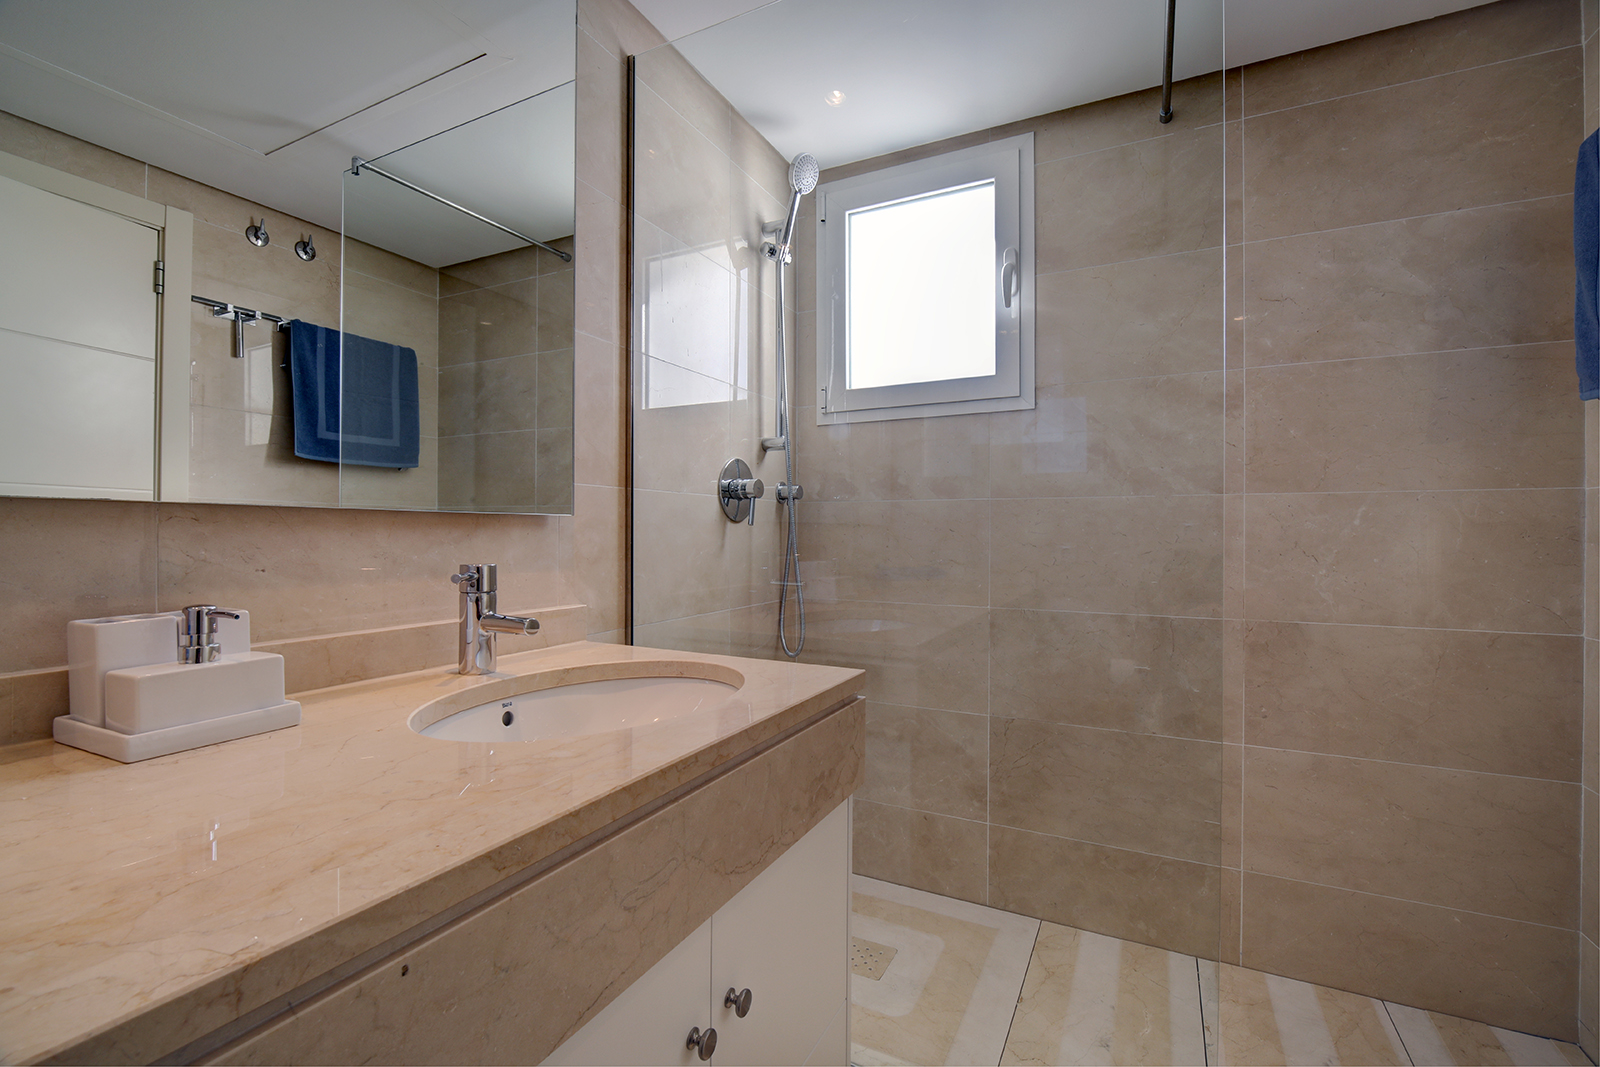 Image shows large marble bathroom with a walk in shower